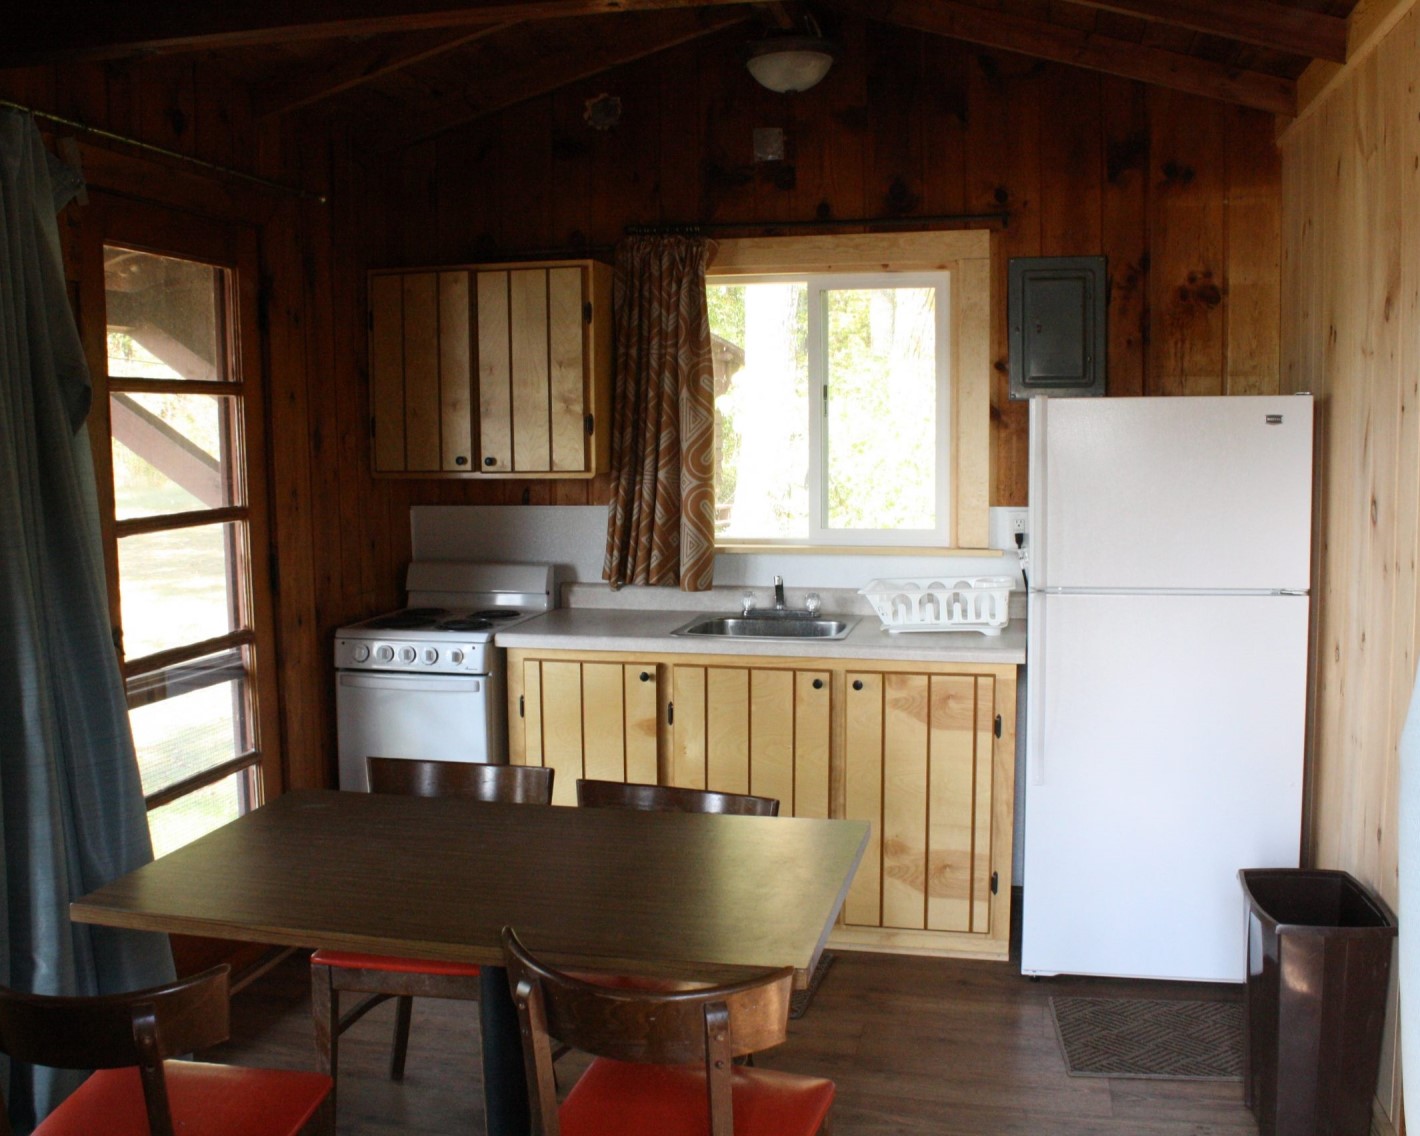 Picture of the cabin kitchen, showing an oven and fridge with a small counter space